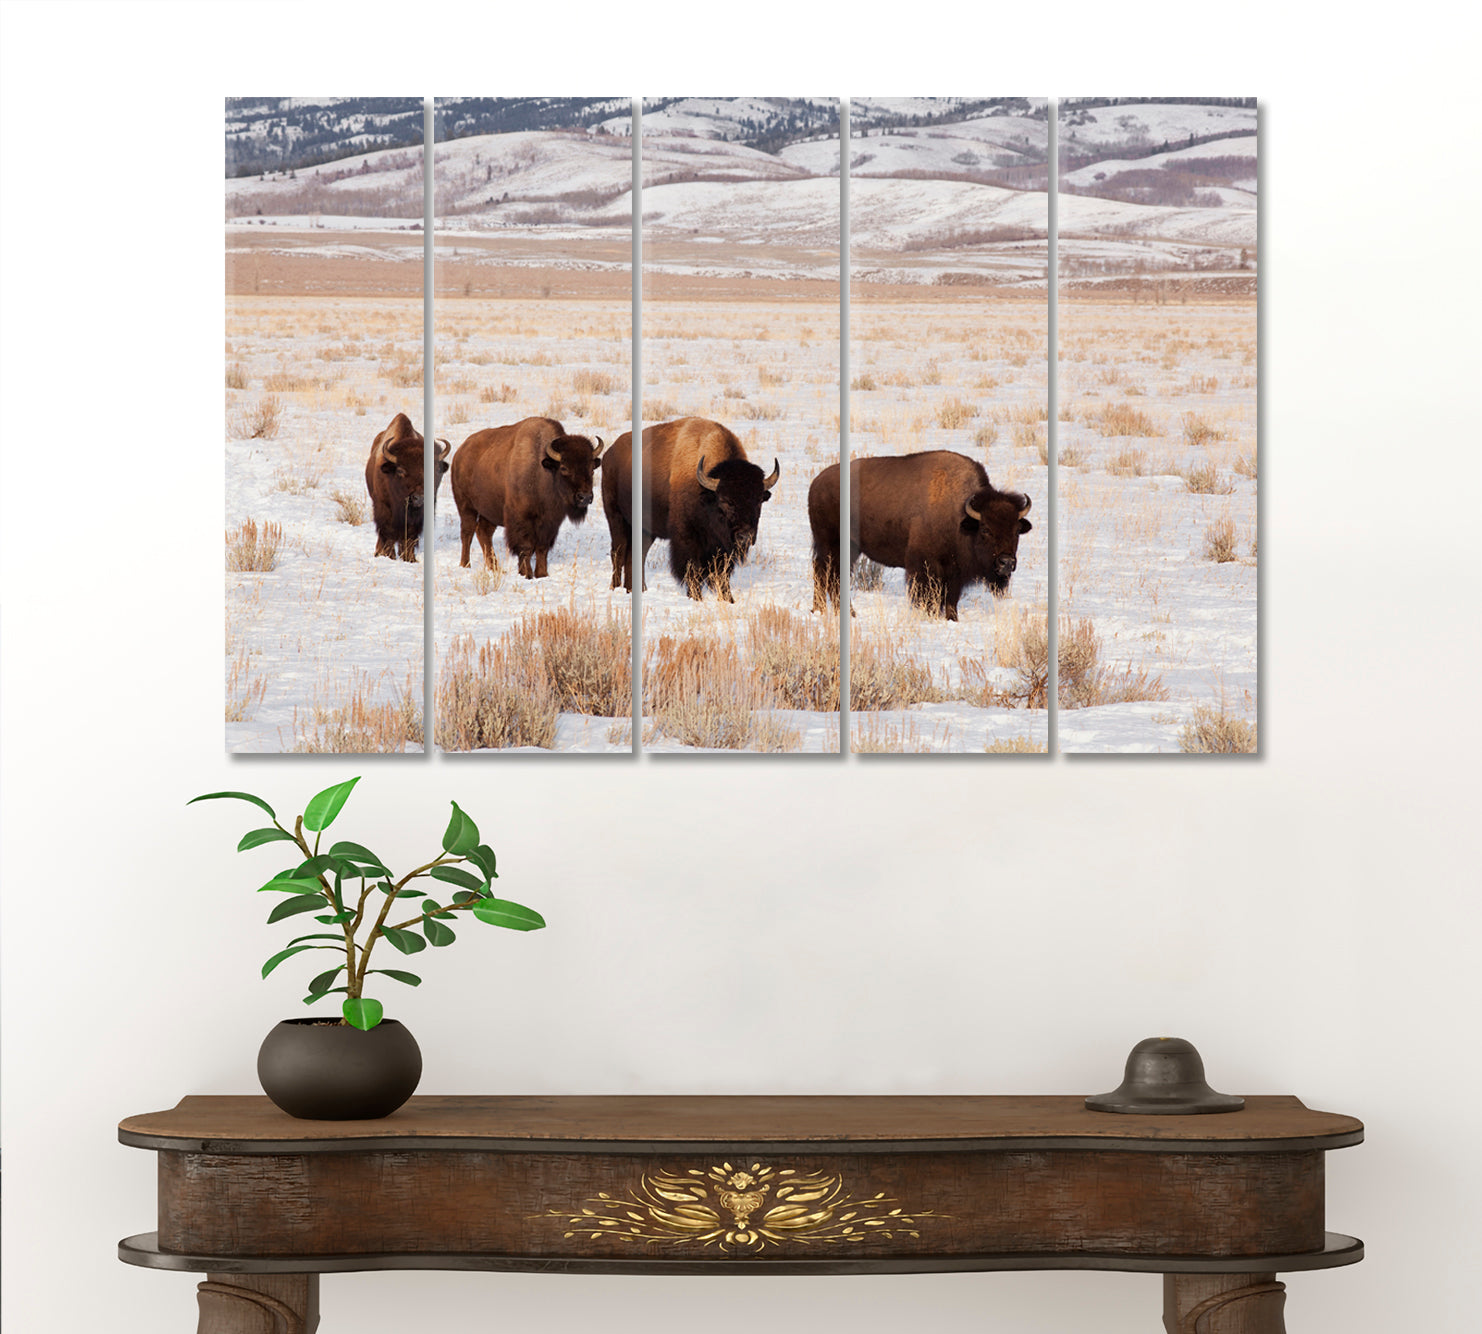 Field With Four American Bison Animals Canvas Print Artesty 5 panels 36" x 24" 